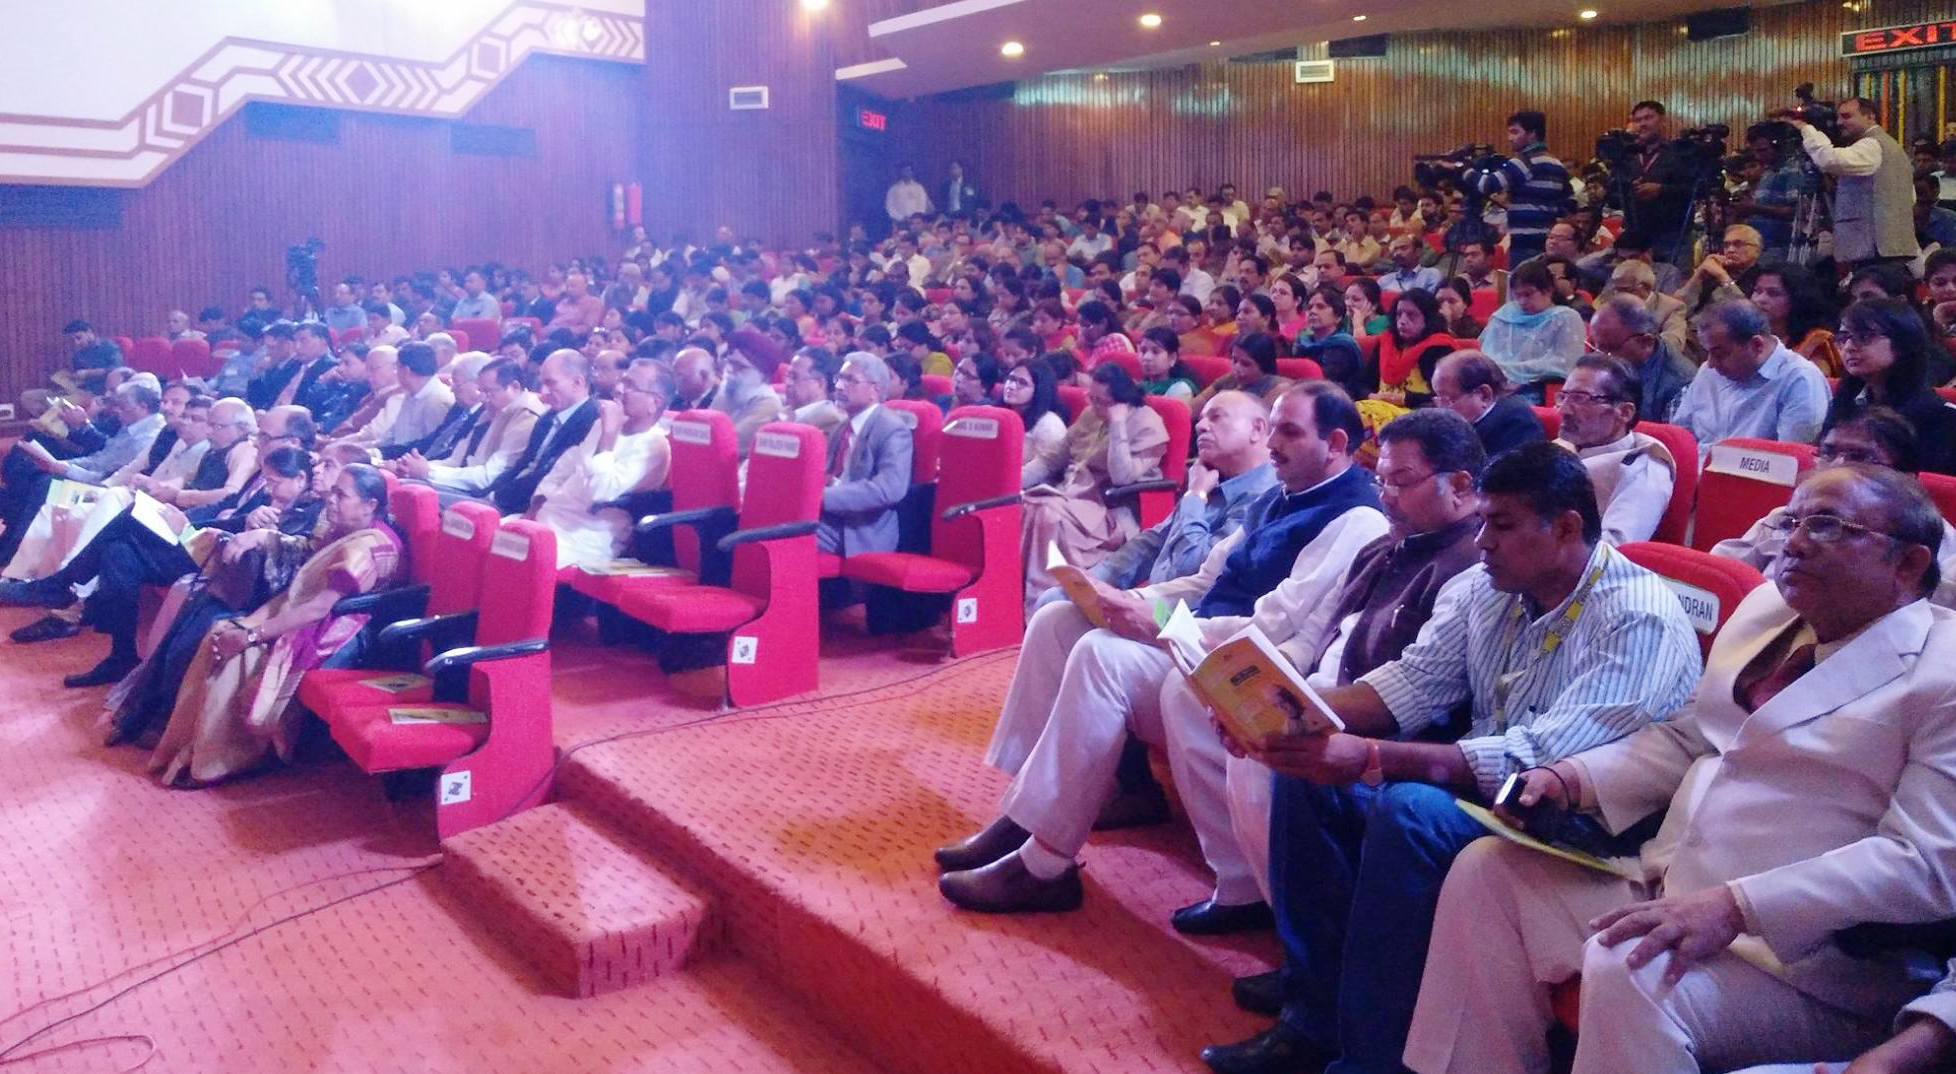 AUDIENCE IN IFFCO SEMINAR